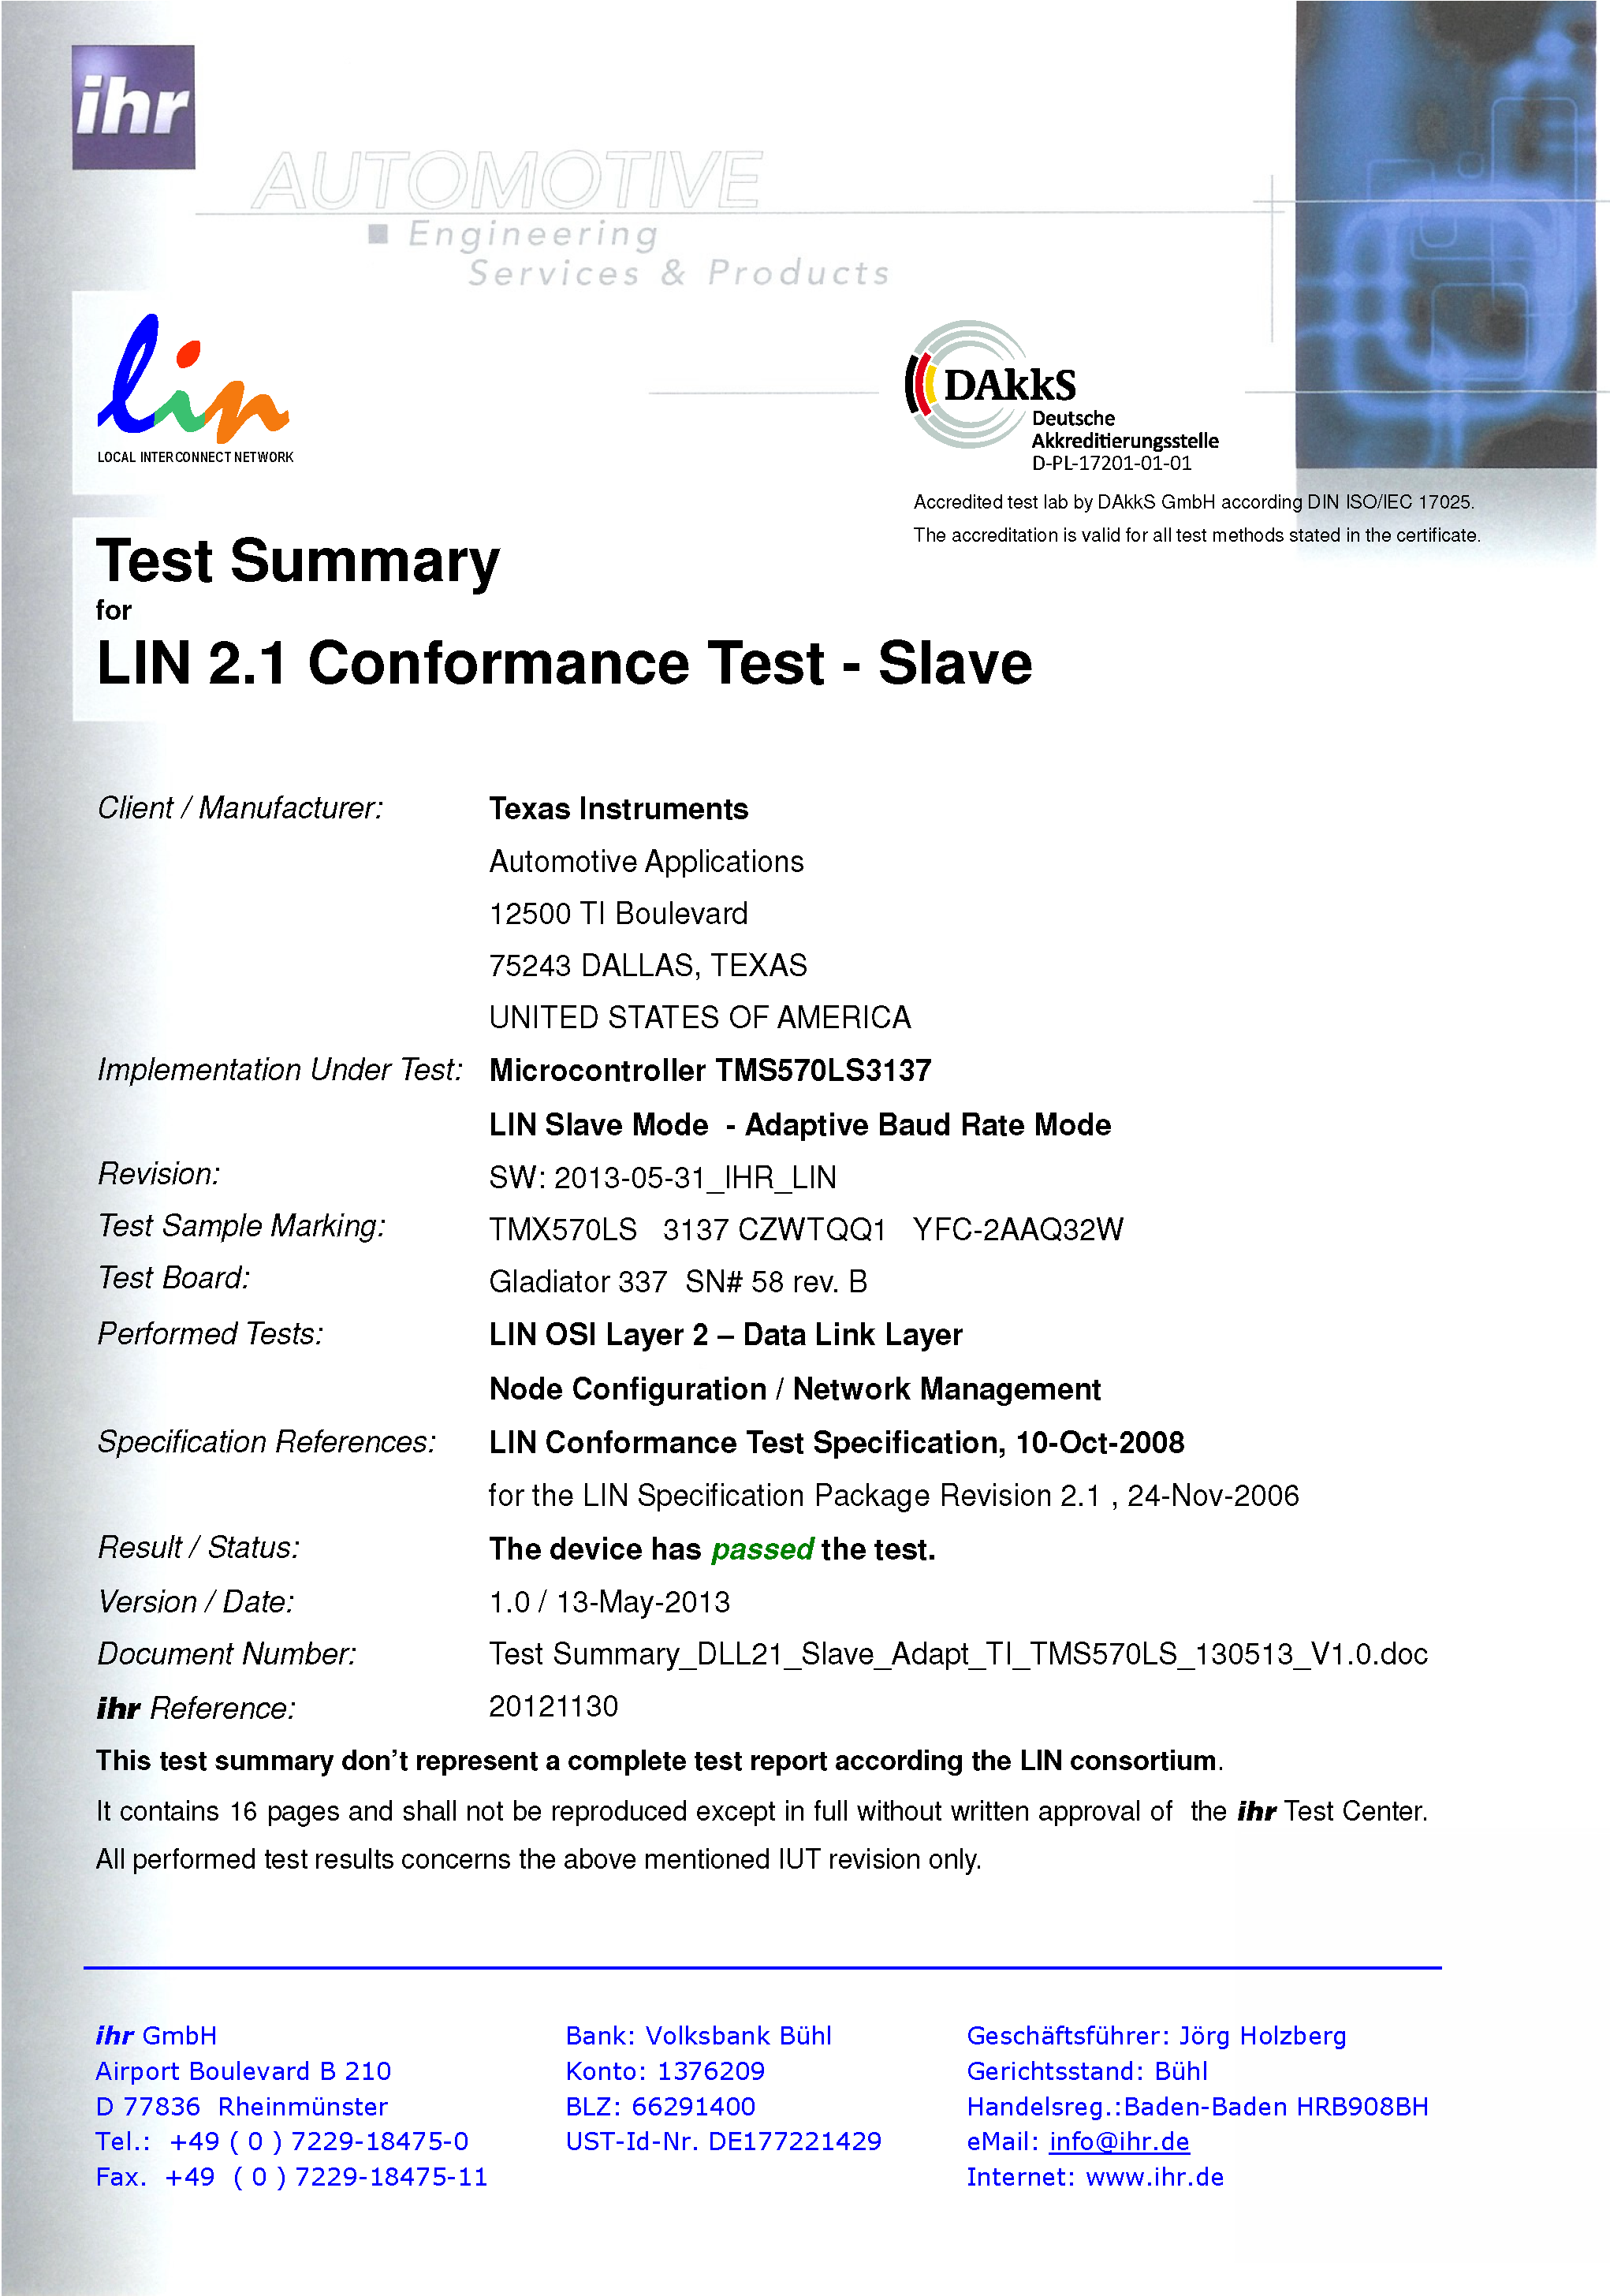 RM46L852 new_LIN_Certification_Slave_Adapt.png